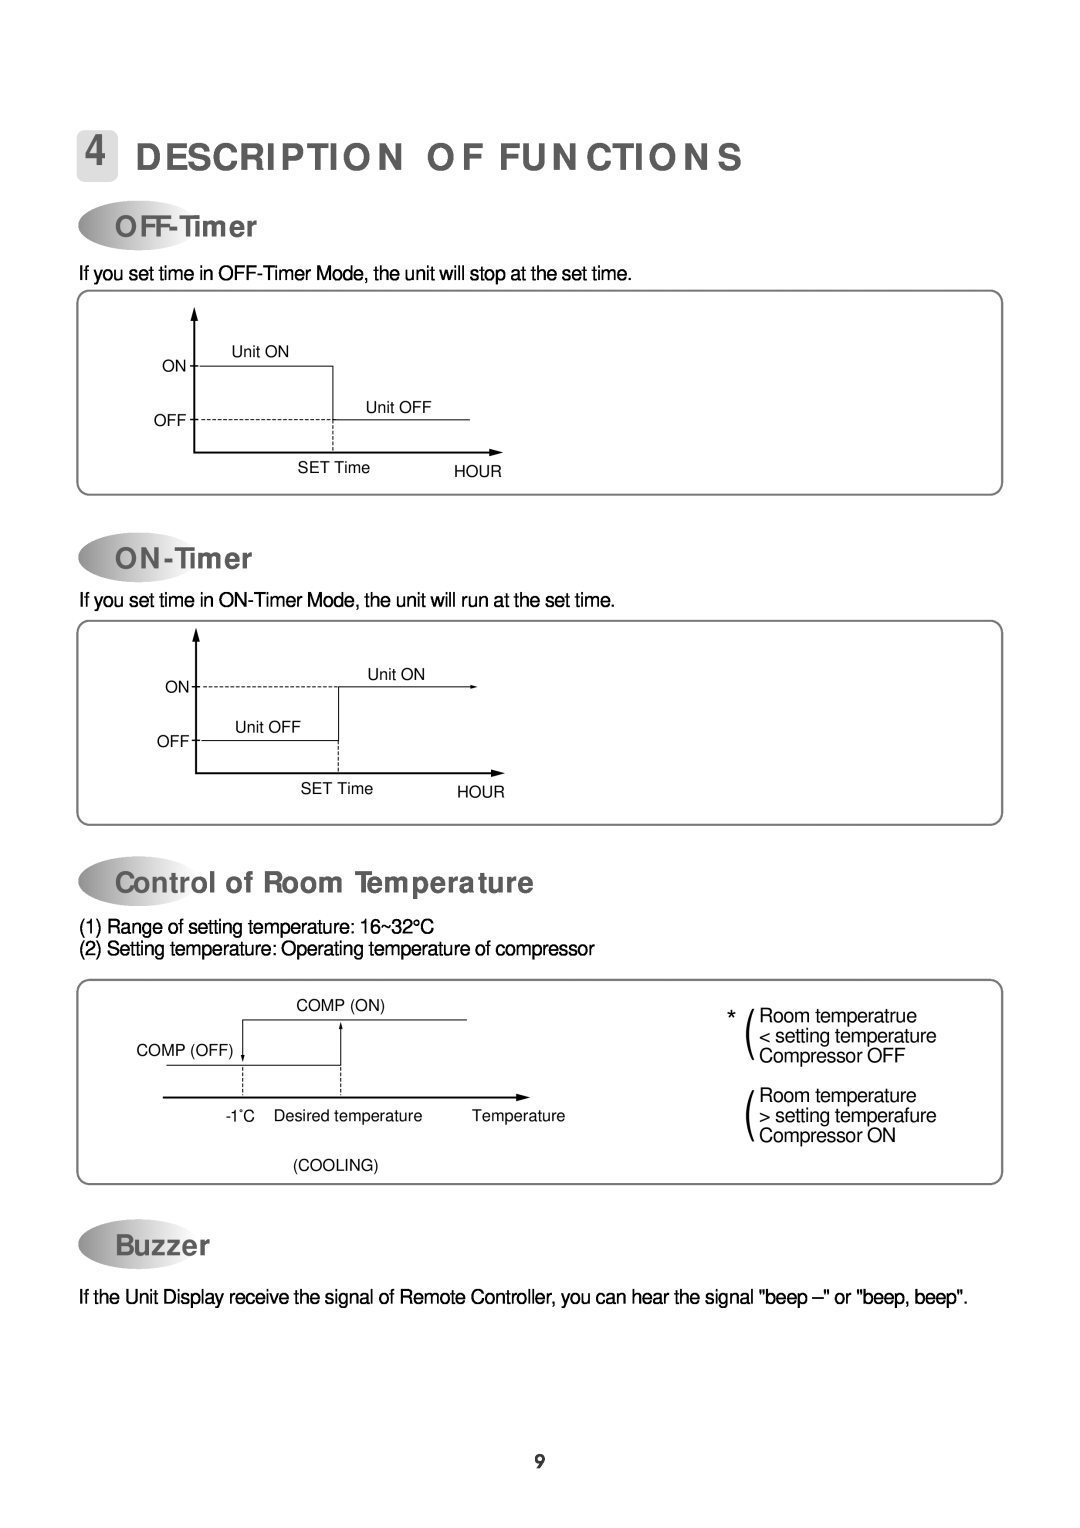 Daewoo DWC-121R service manual 4DESCRIPTION OF FUNCTIONS, OFF-Timer, ON-Timer, Control of Room Temperature, Buzzer 